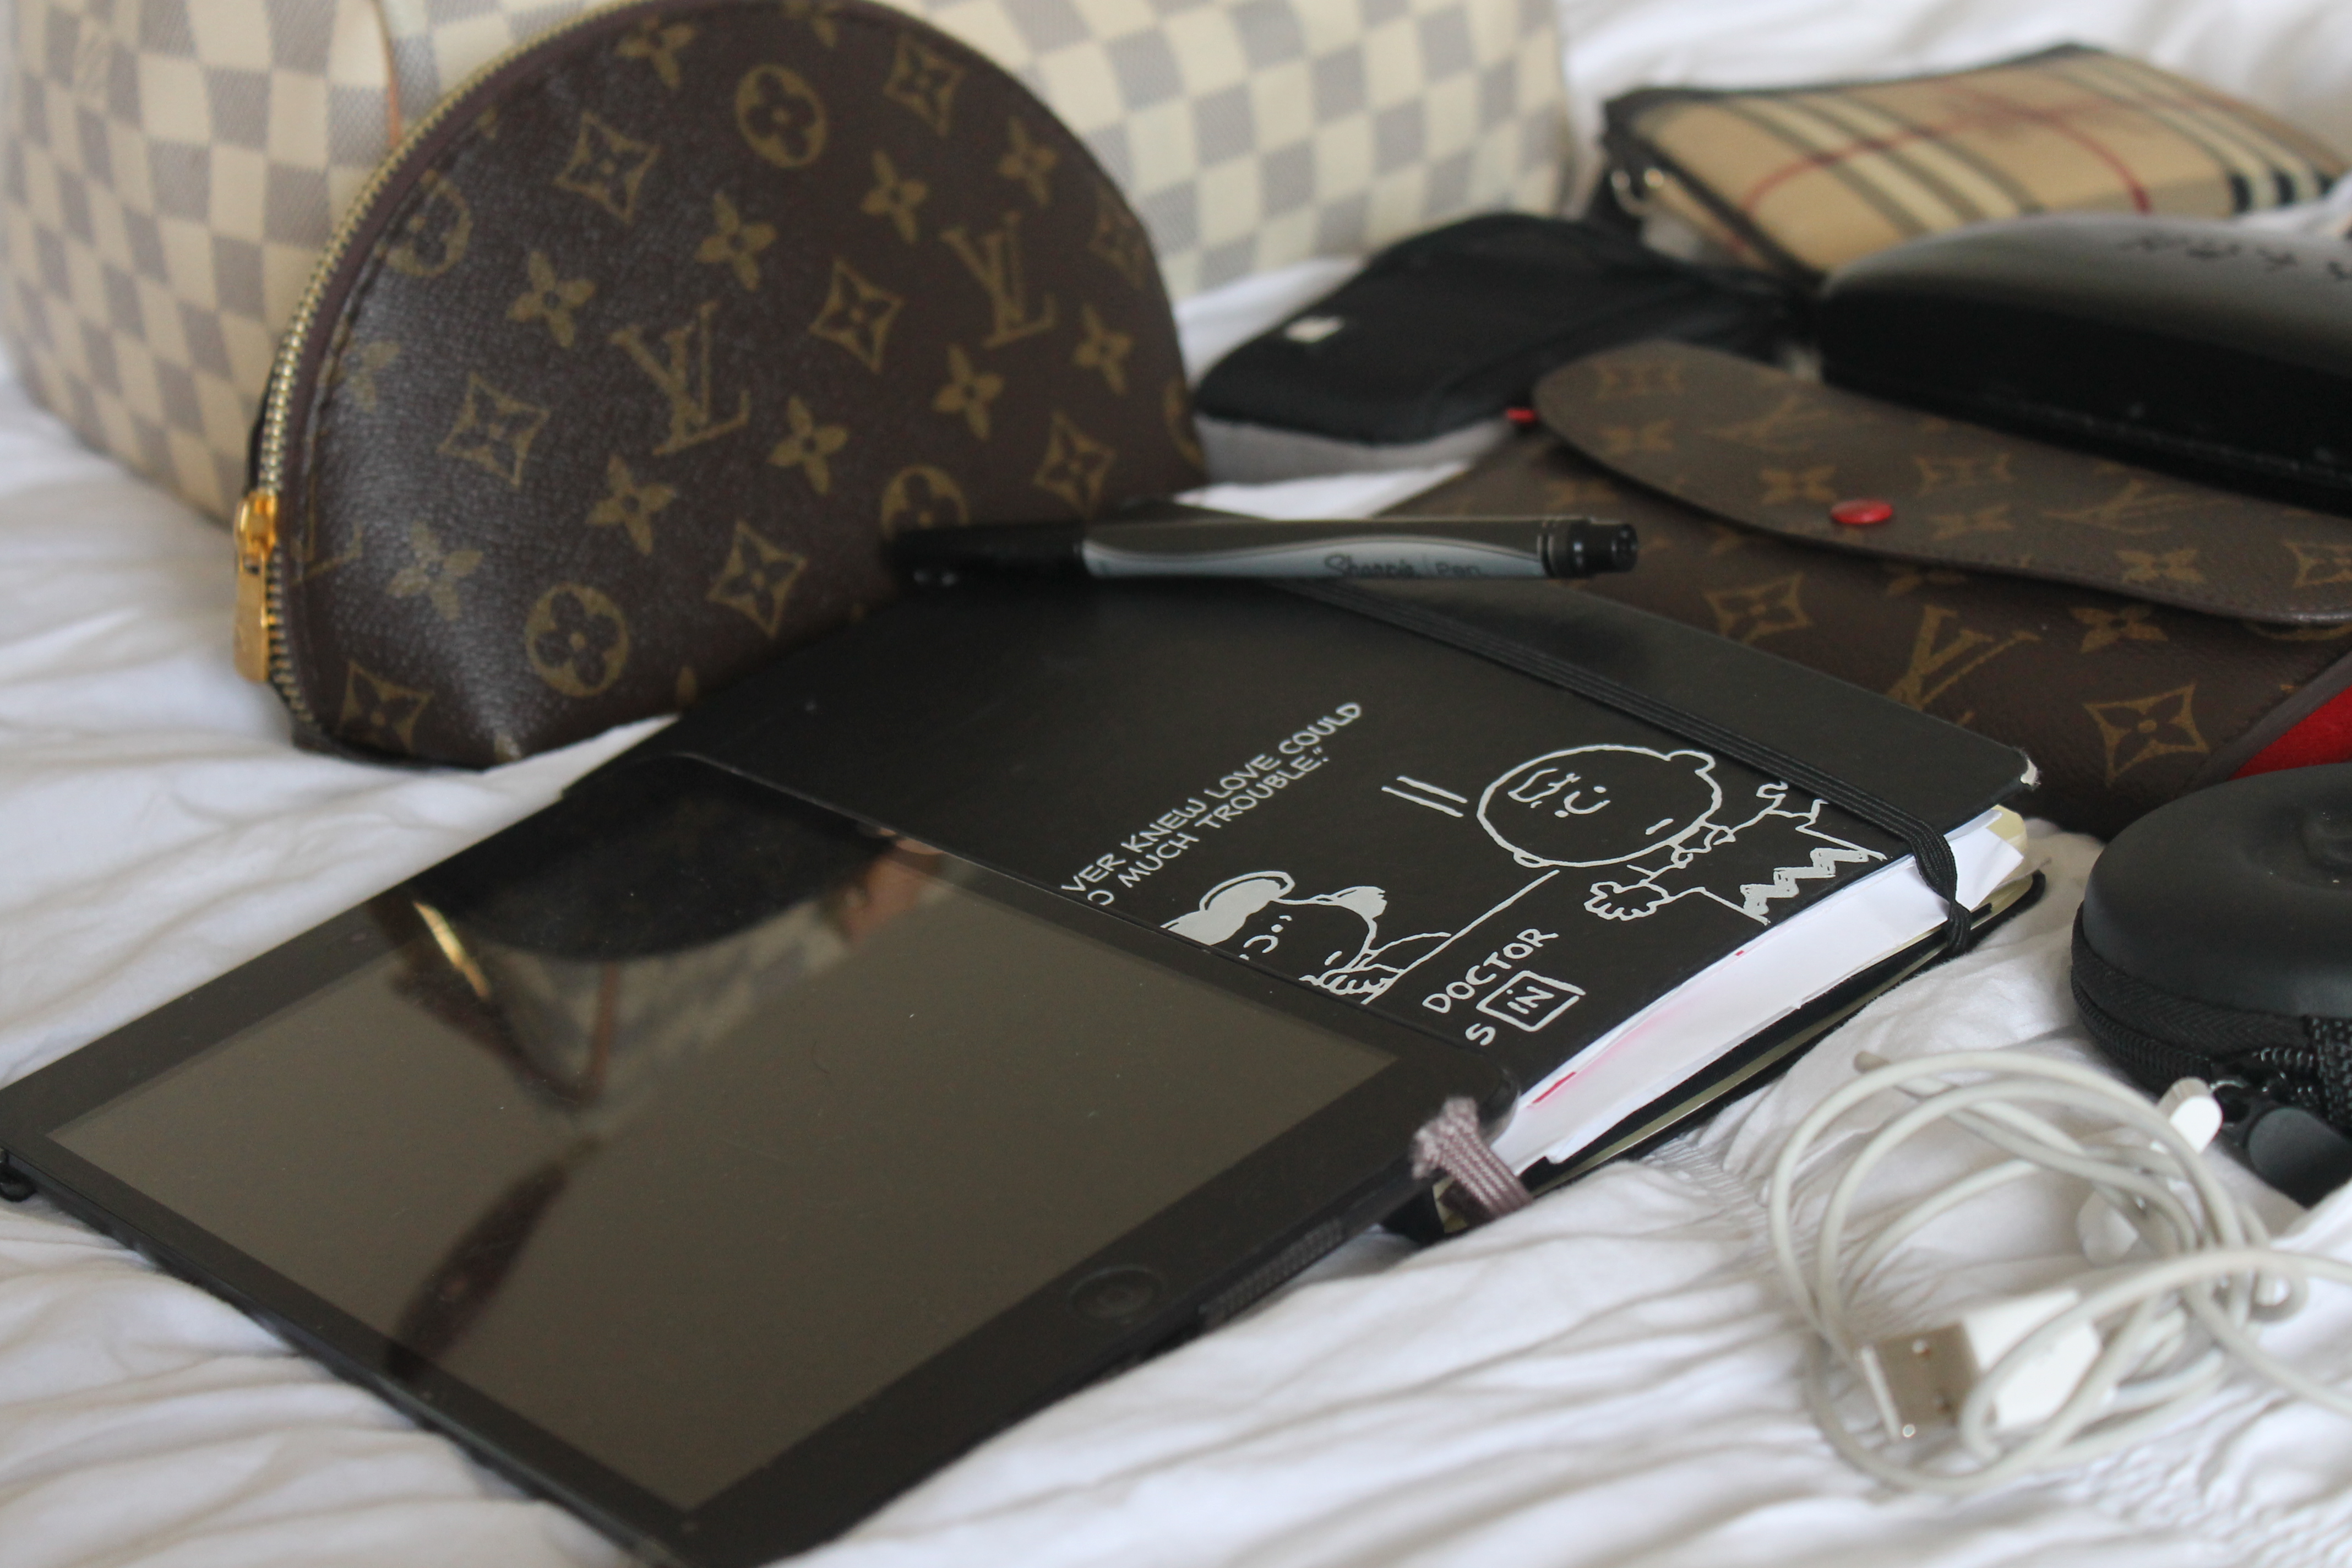 How to get a FREE Louis Vuitton Bag…. Almost 